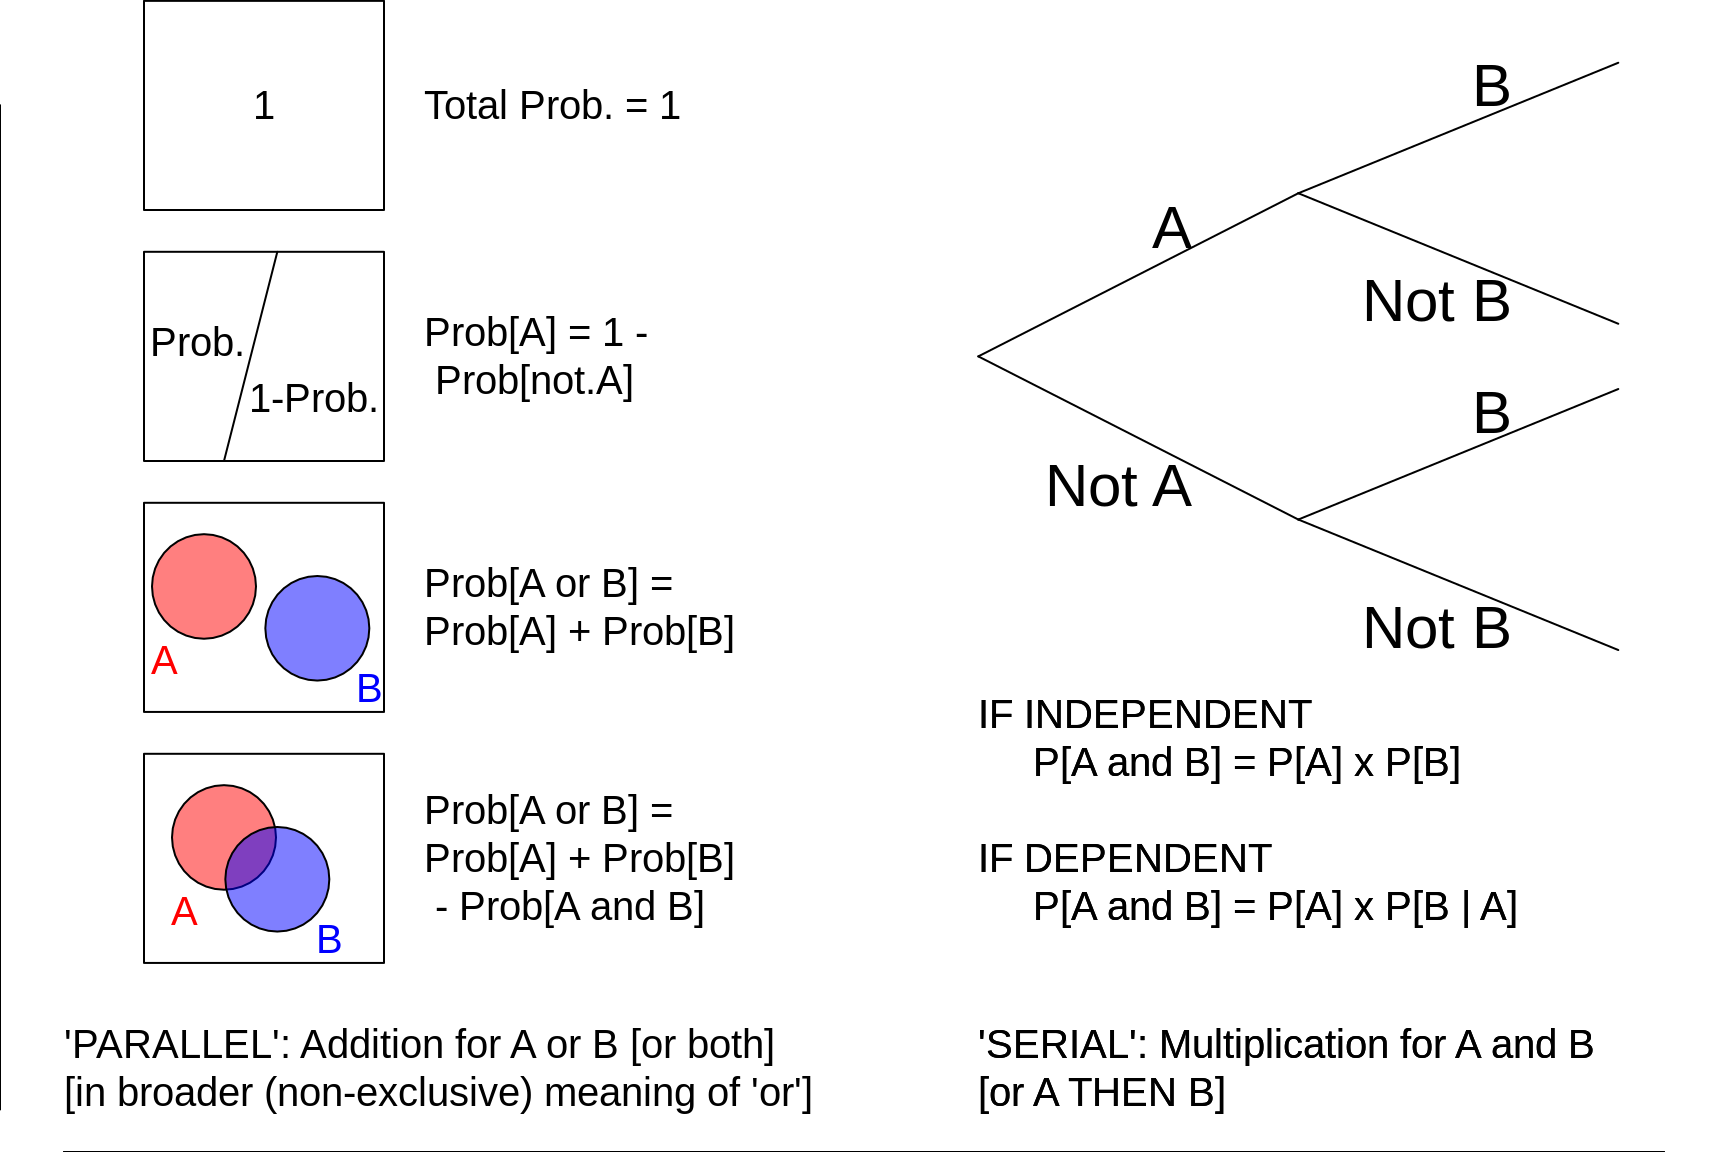 Basic Probablity Axioms and Rules. 'B | A' means 'B GIVEN A' or 'B CONDITIONAL ON A'.